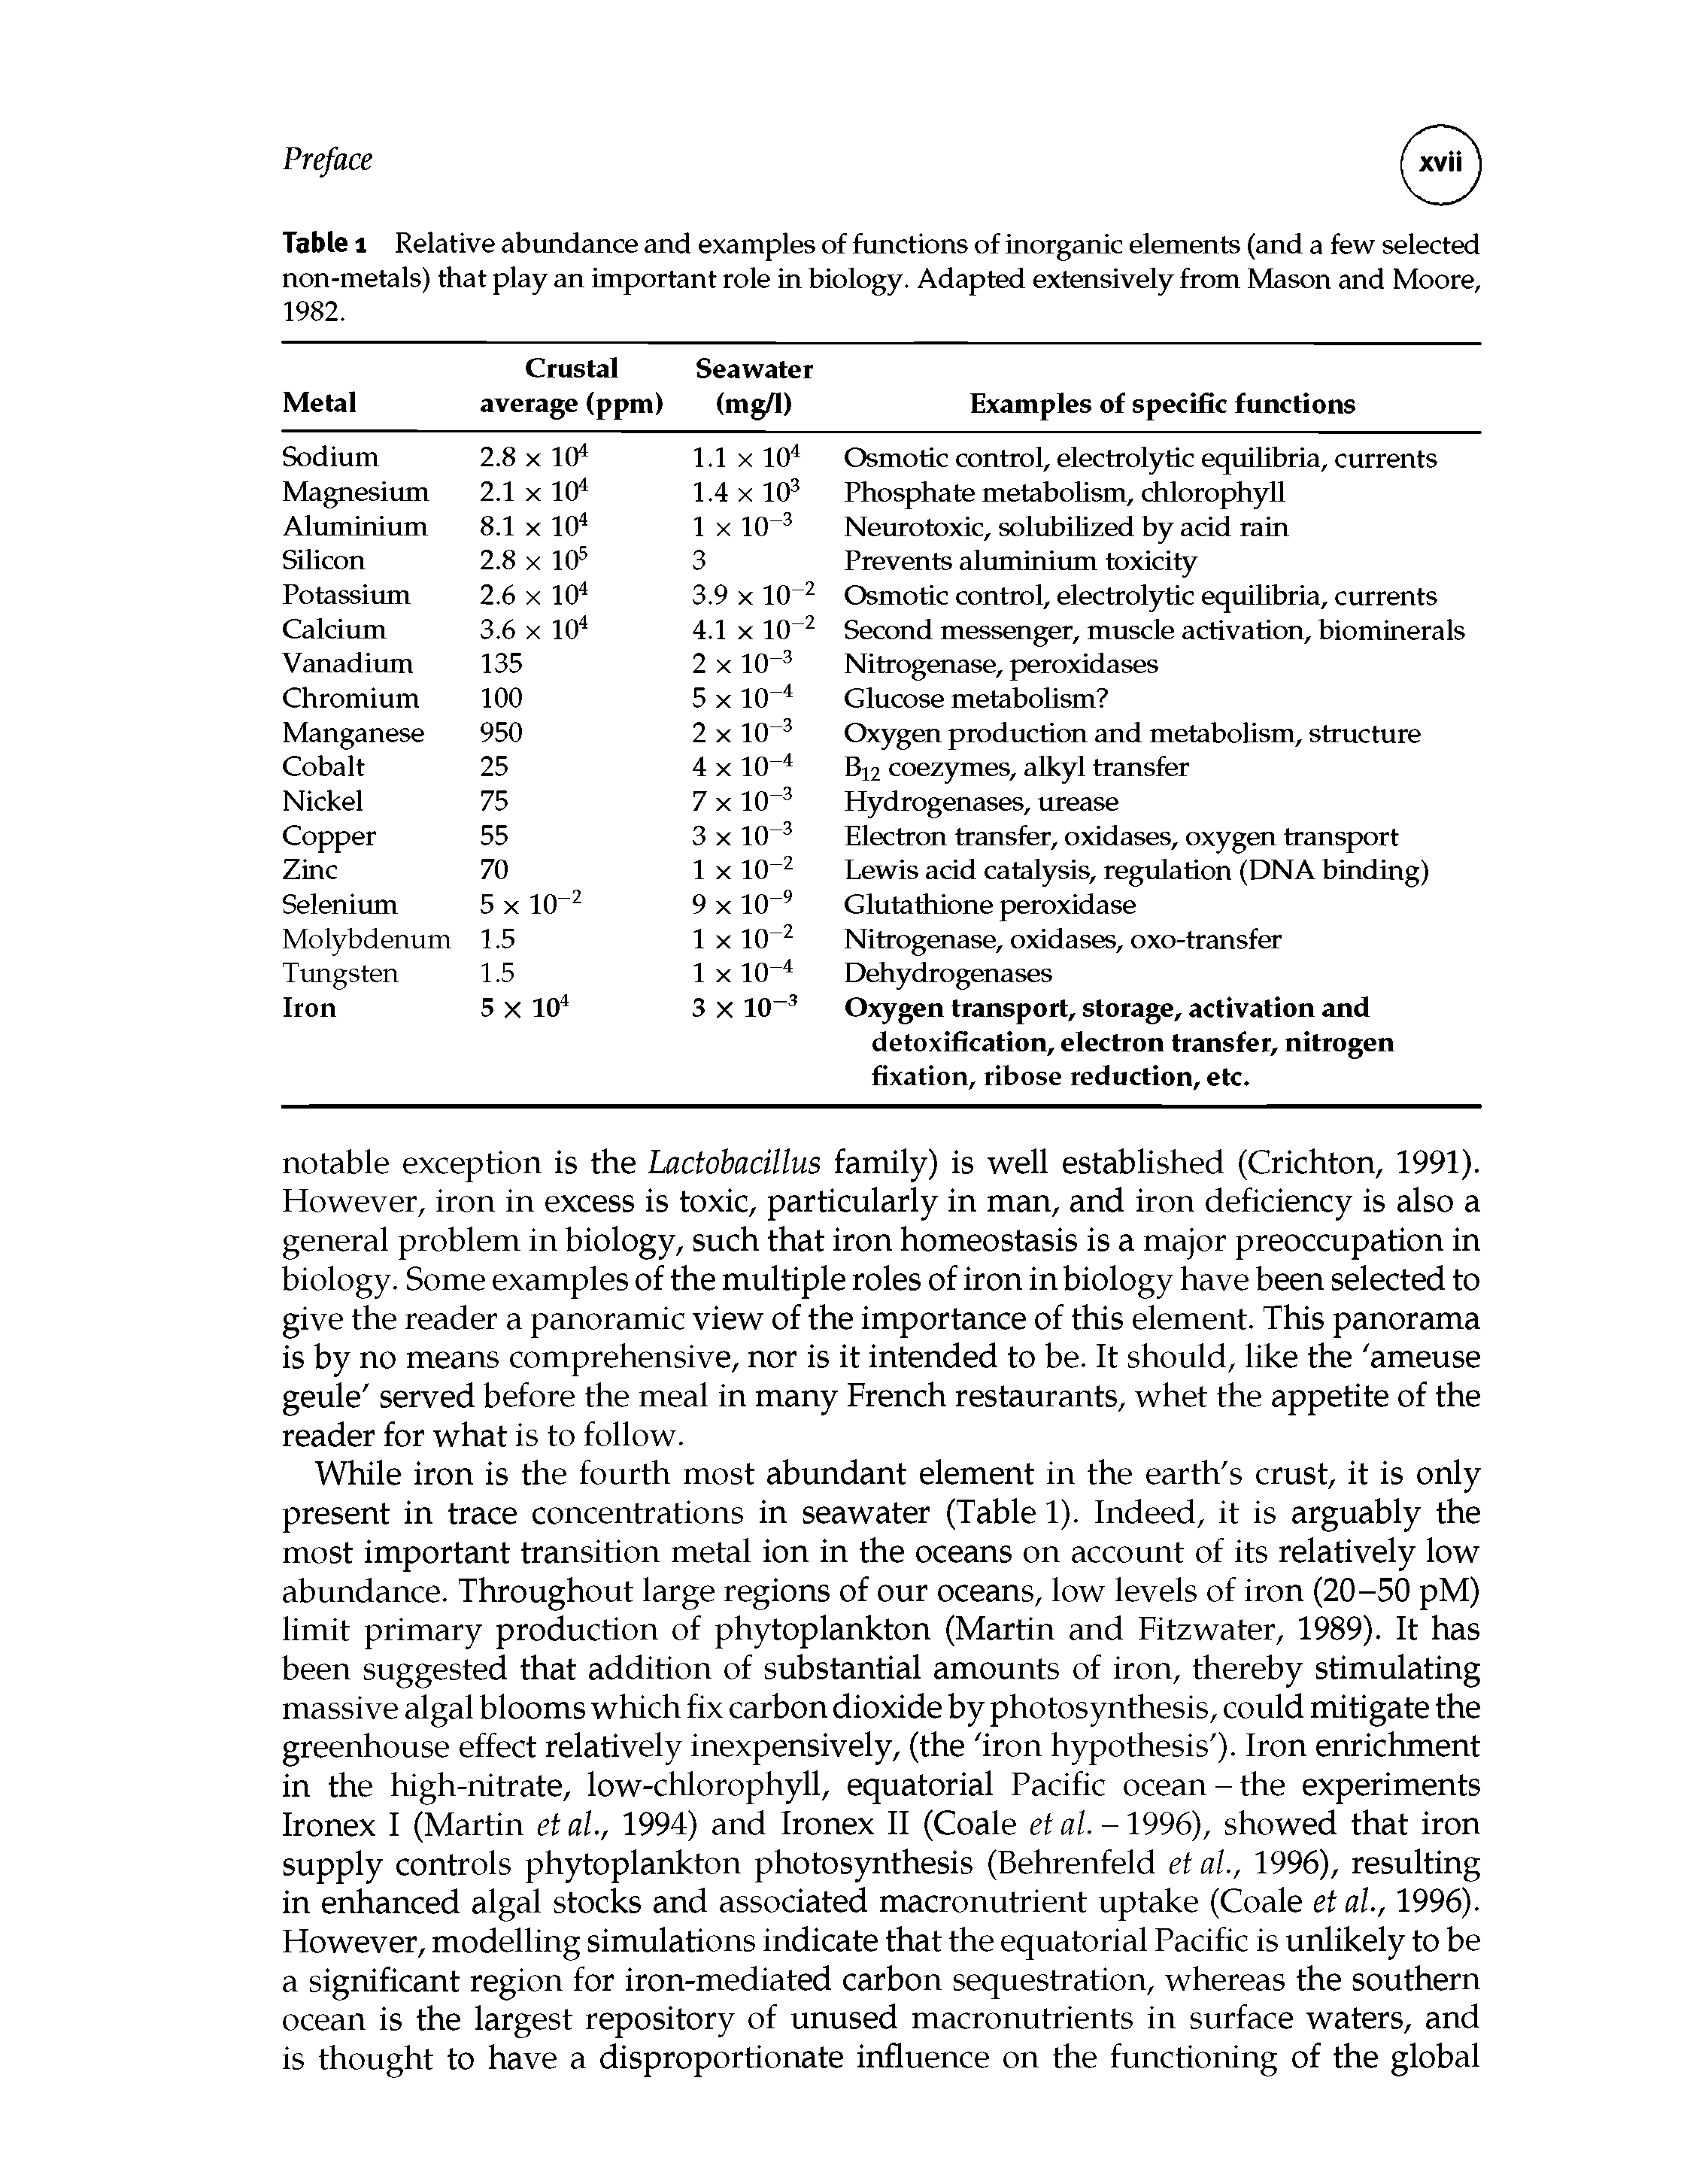 Table 1 Relative abundance and examples of functions of inorganic elements (and a few selected non-metals) that play an important role in biology. Adapted extensively from Mason and Moore, 1982.